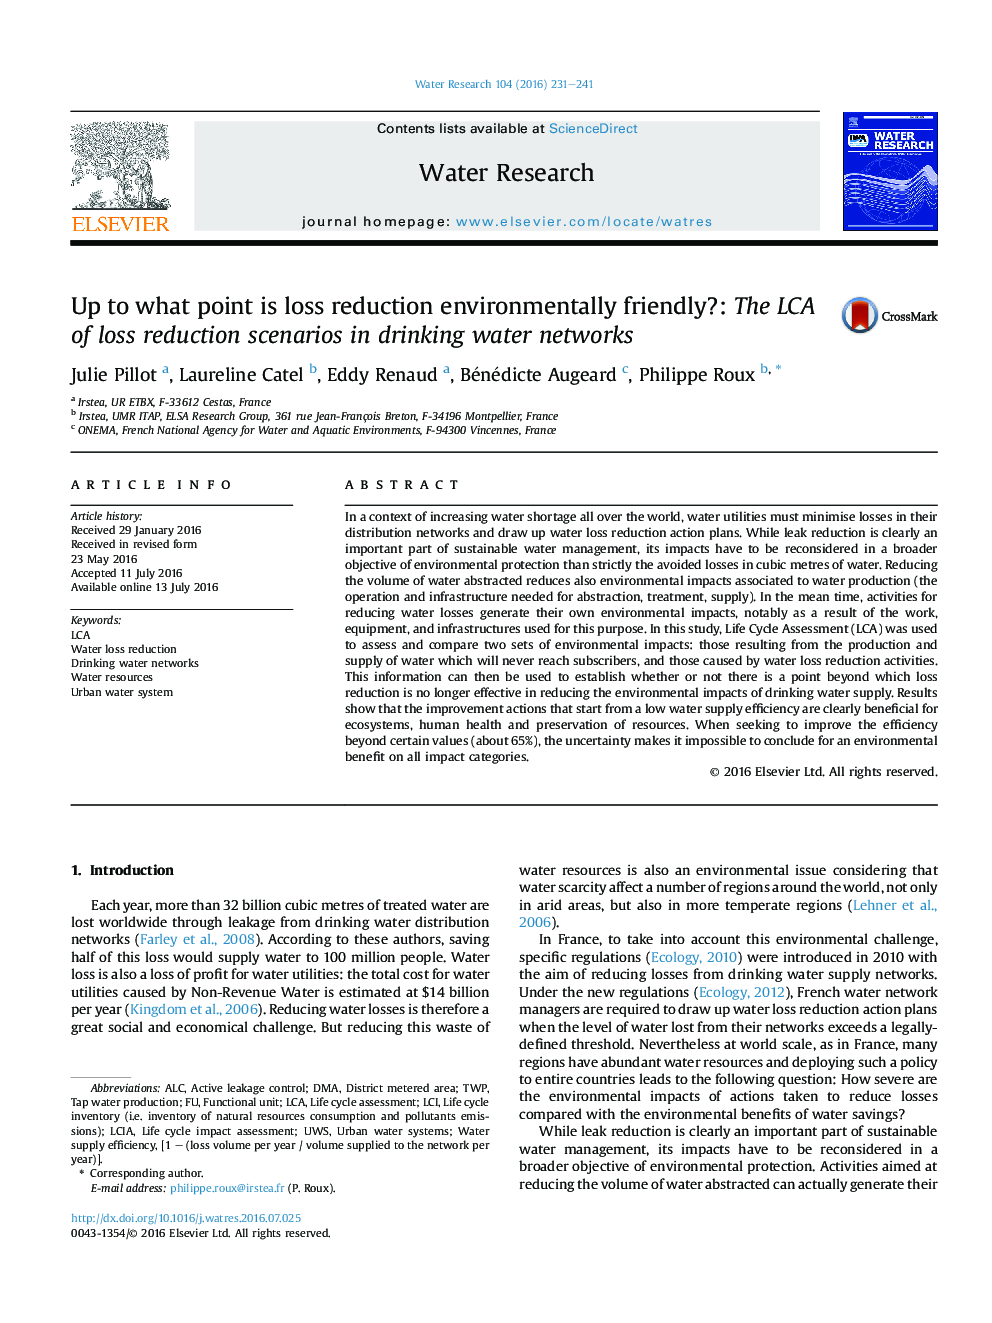 Up to what point is loss reduction environmentally friendly?: The LCA of loss reduction scenarios in drinking water networks